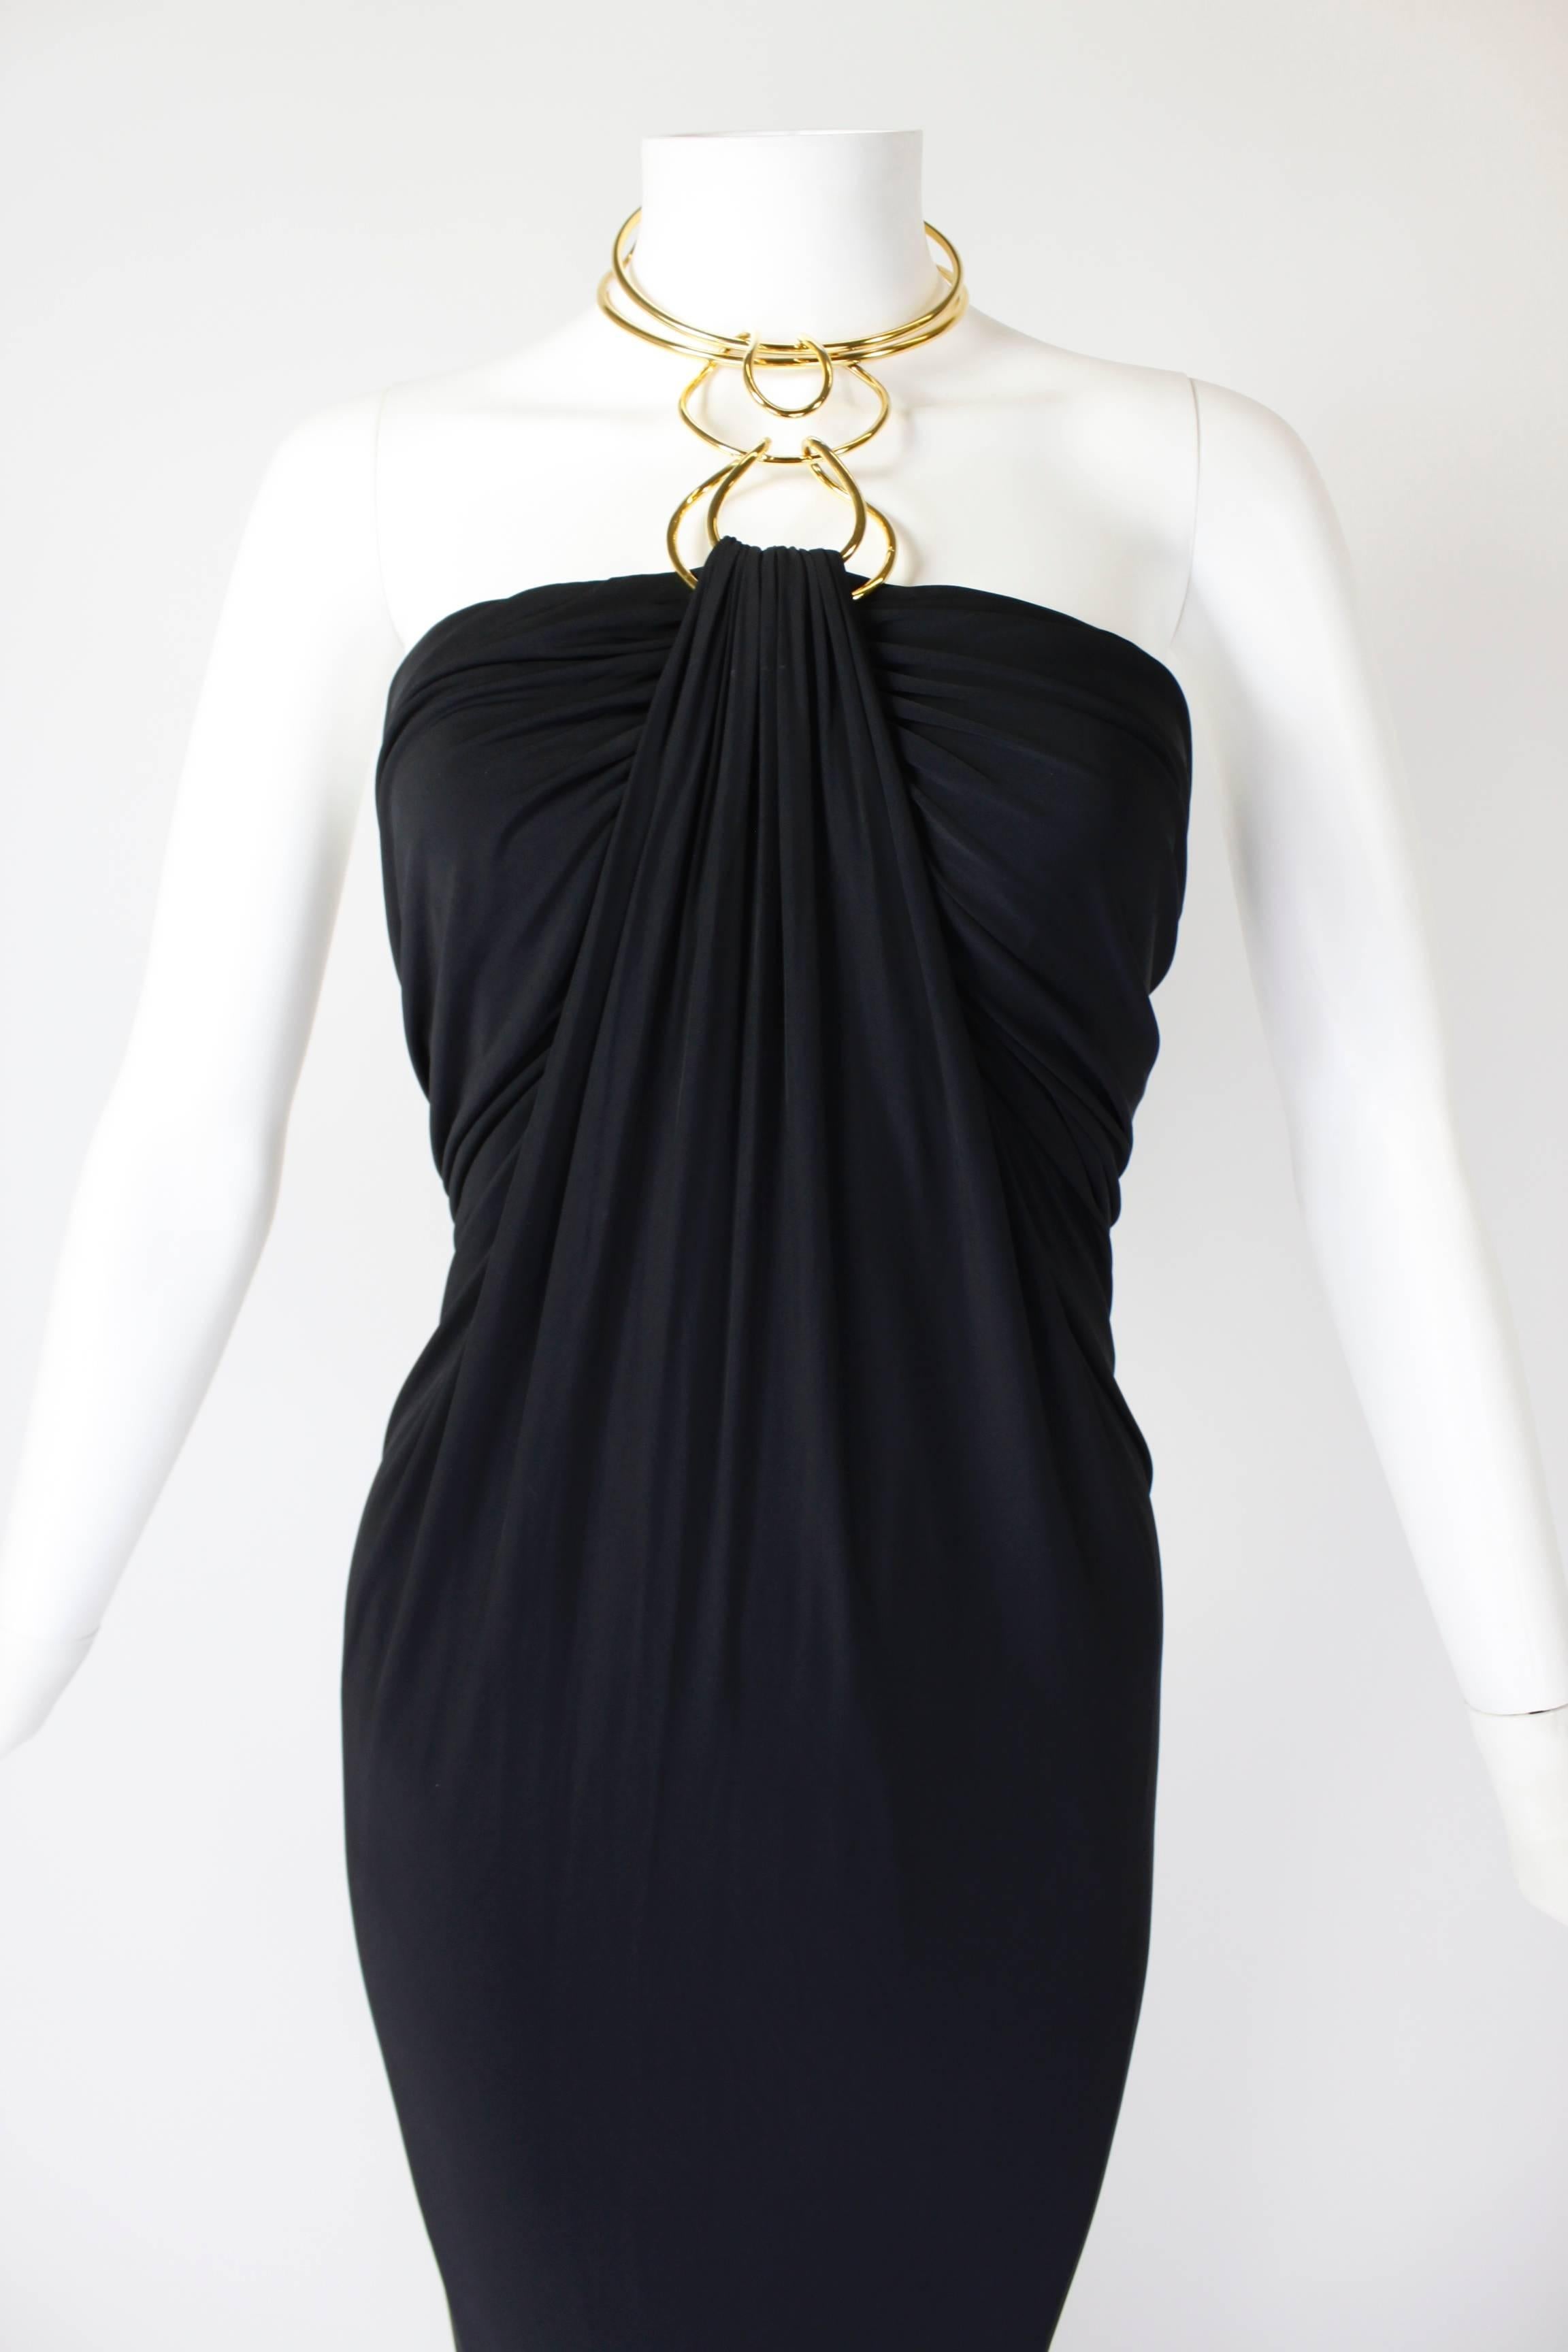 1990s Donna Karan Slinky Black Jersey Gown with Gold Choker Halter For Sale 3